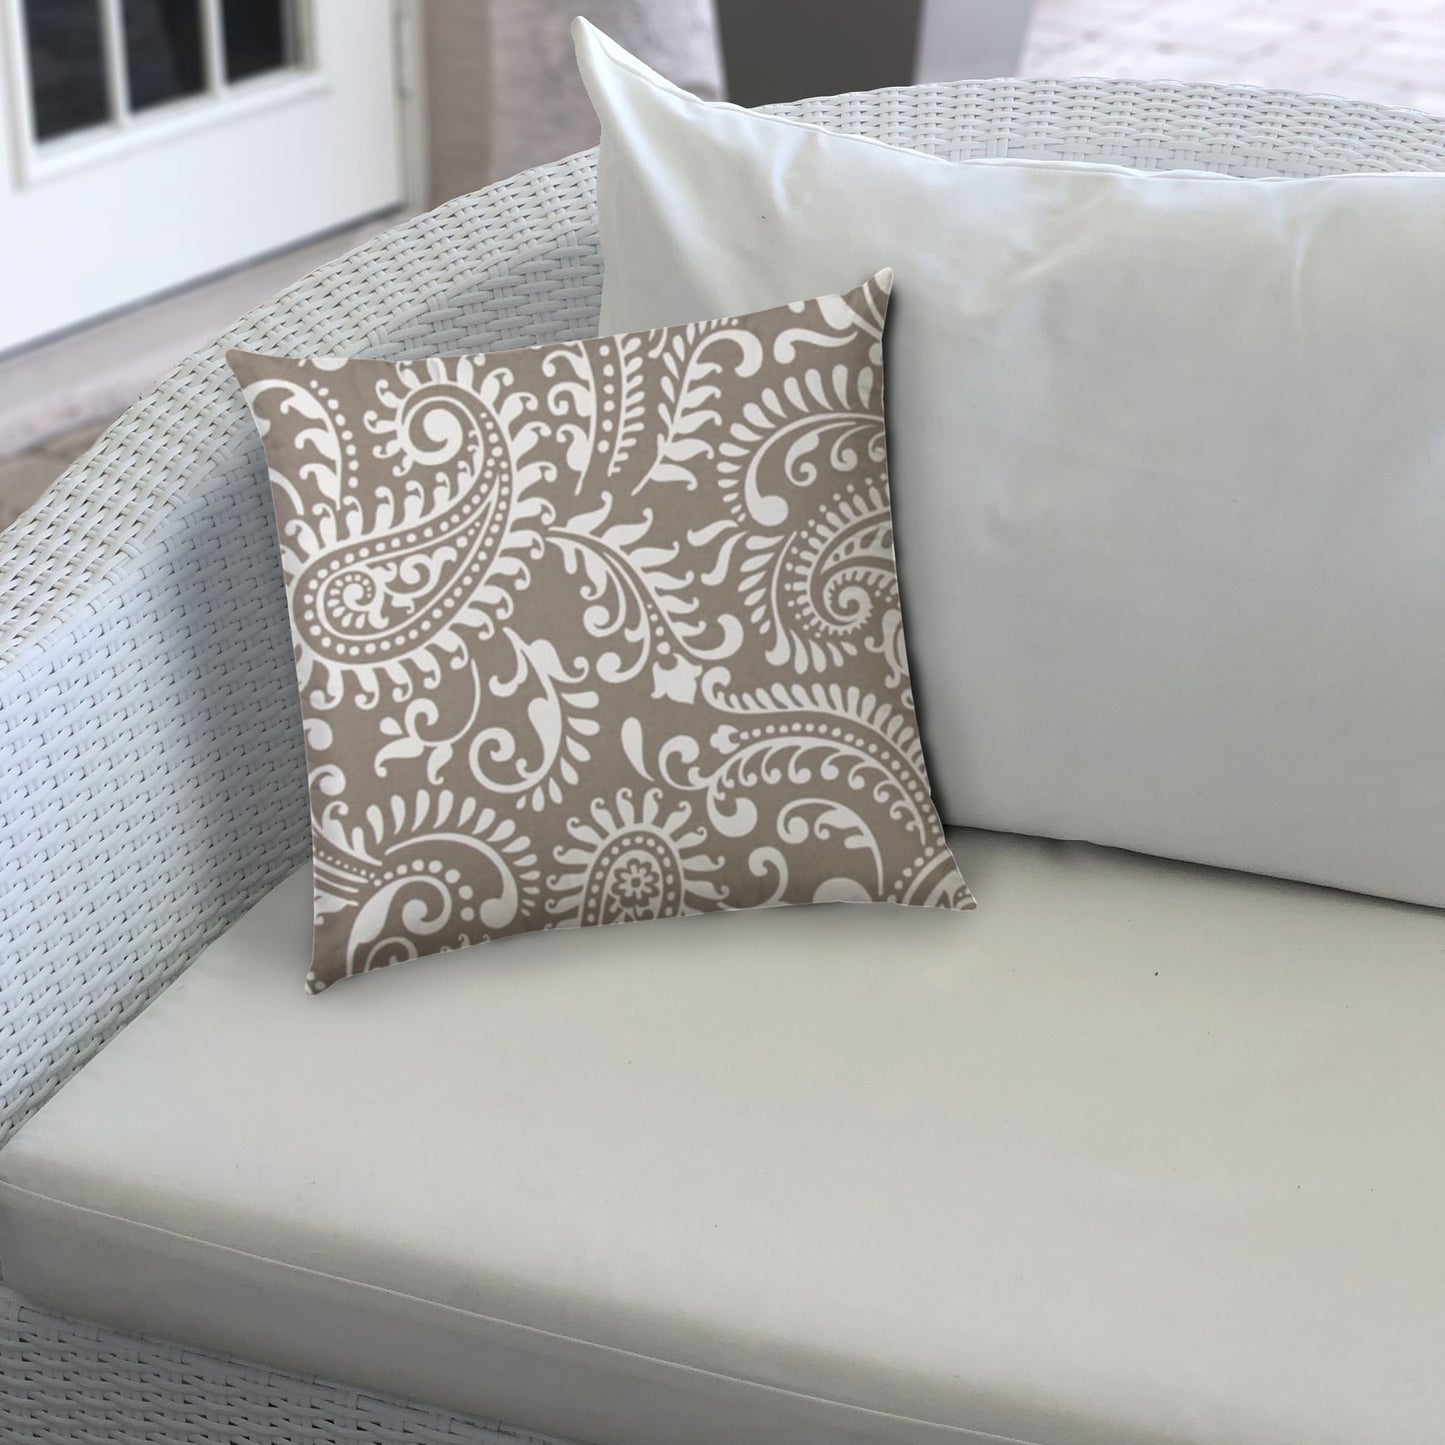 DREAMY Taupe Indoor/Outdoor Pillow - Sewn Closure